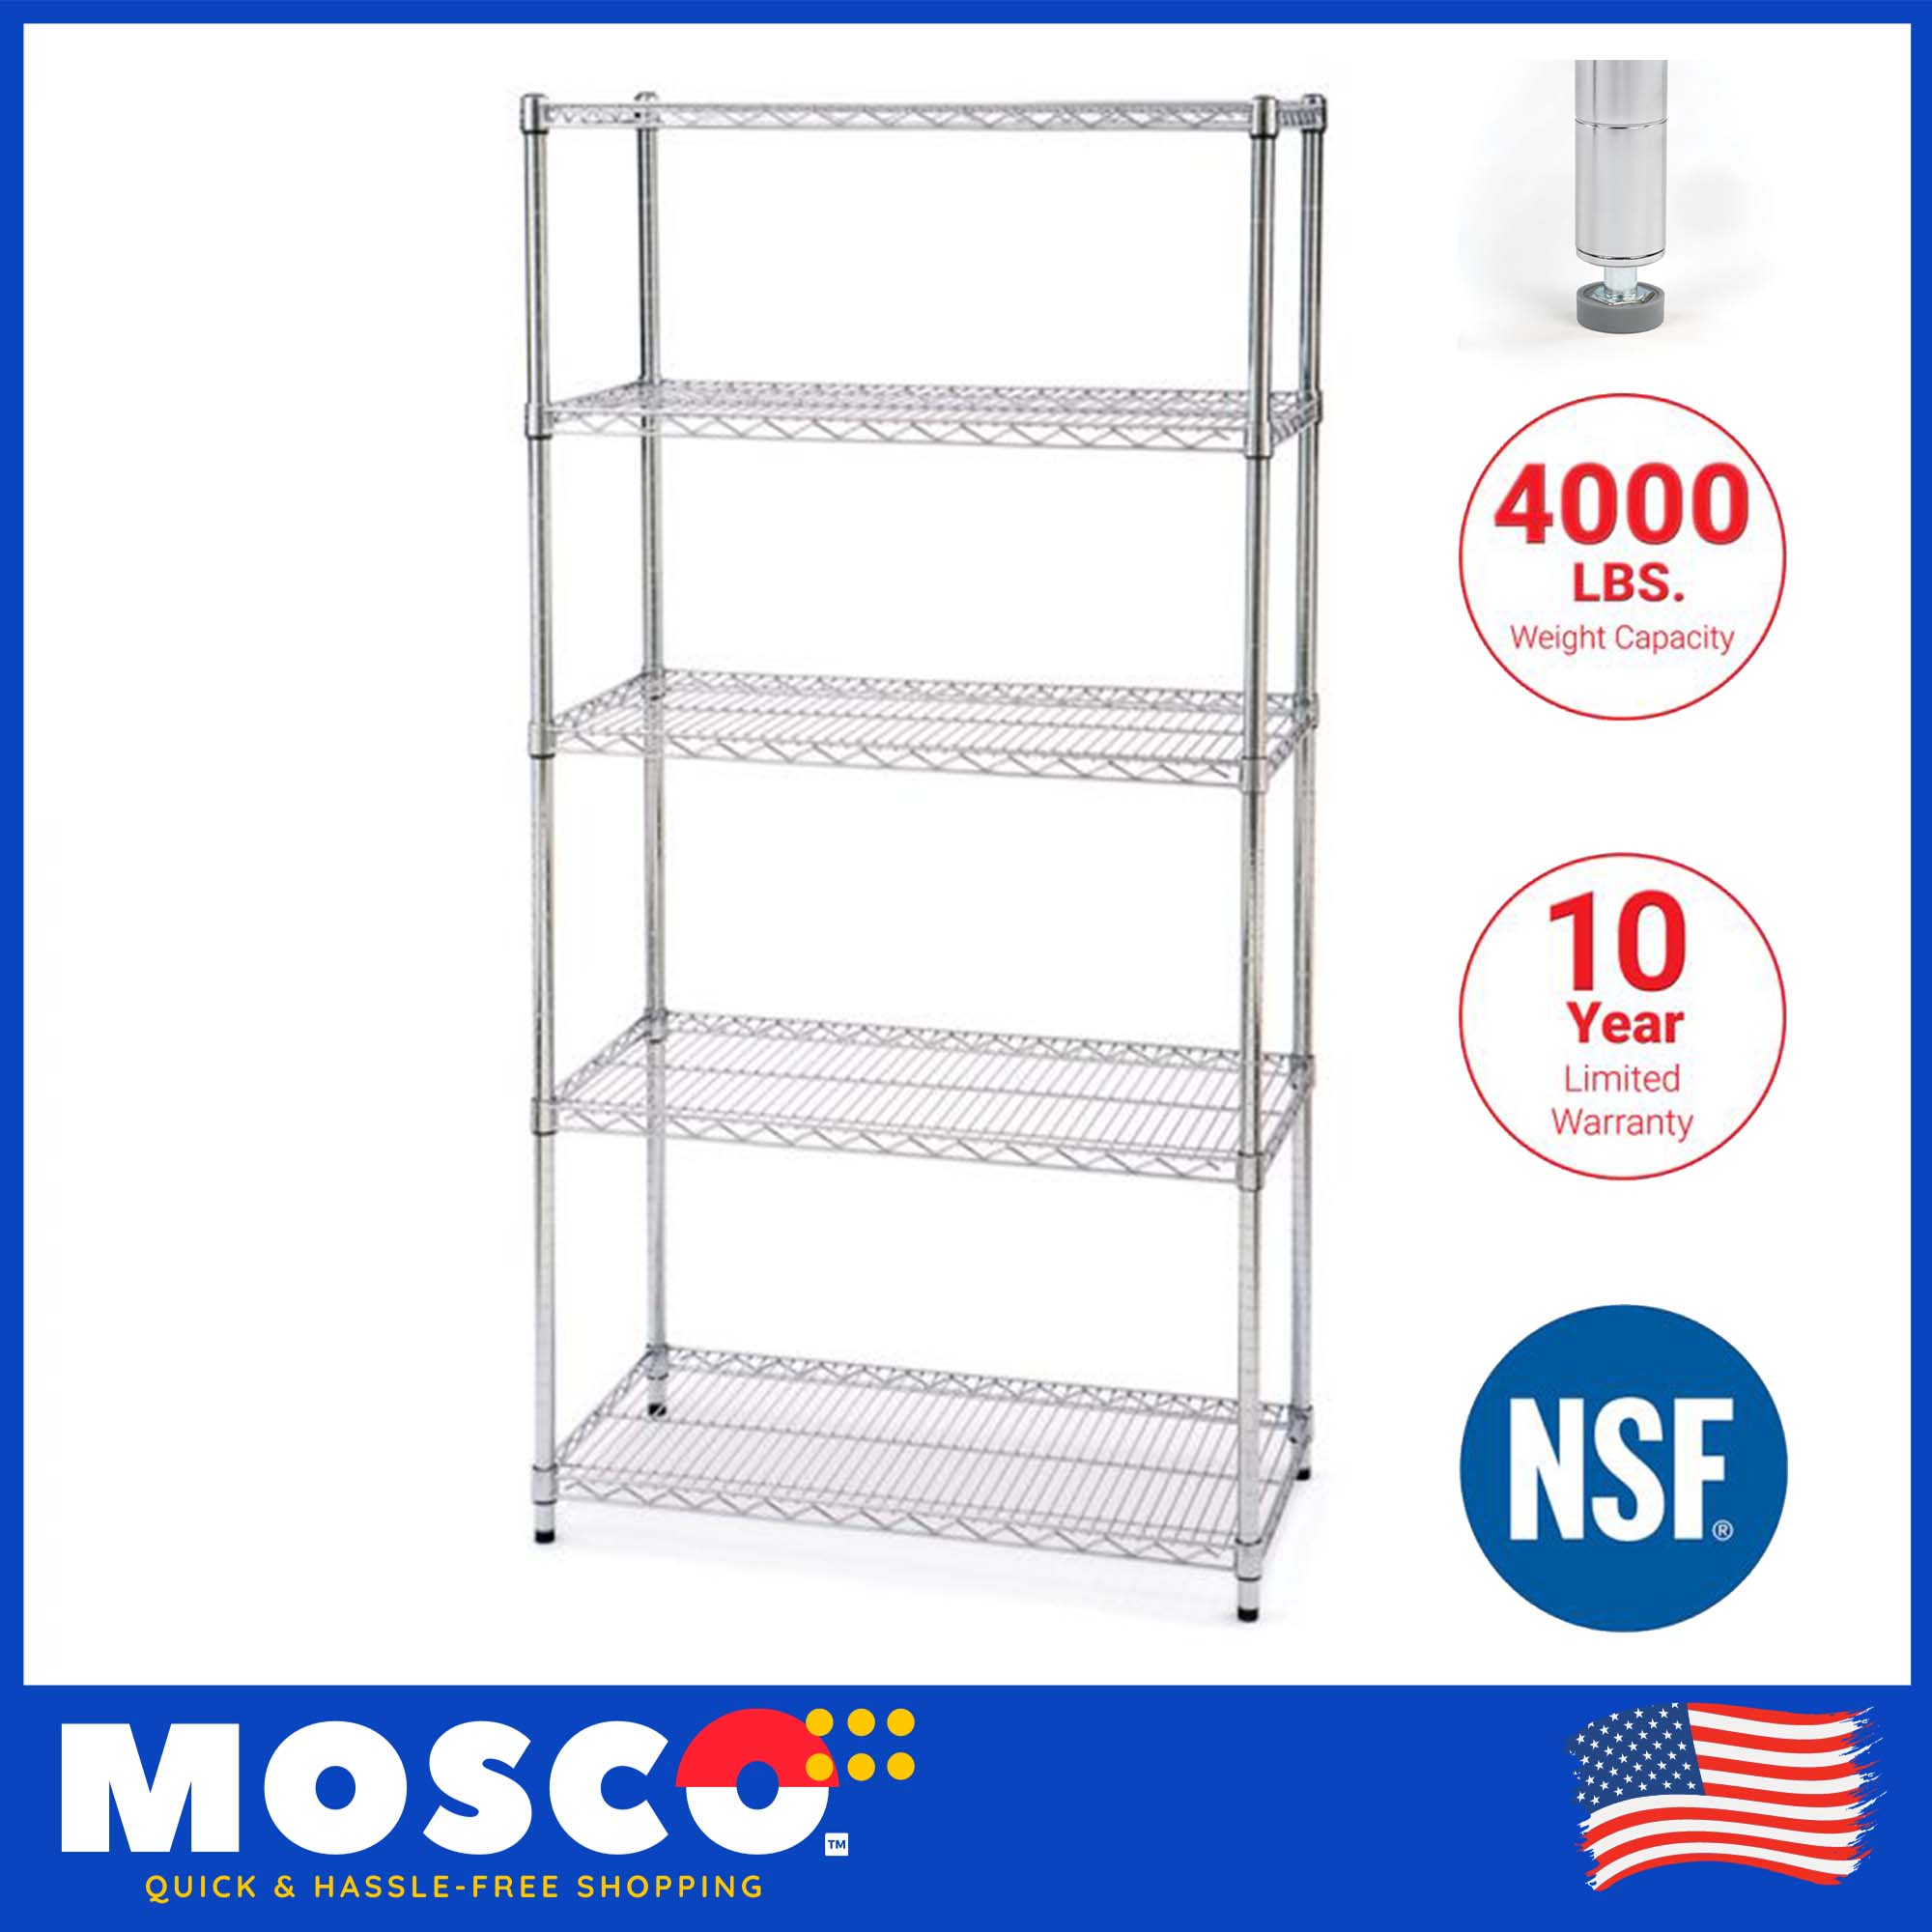 Nsf Certified Steel Wire Shelving, Seville Classics 5 Level Commercial Shelving With Wheels